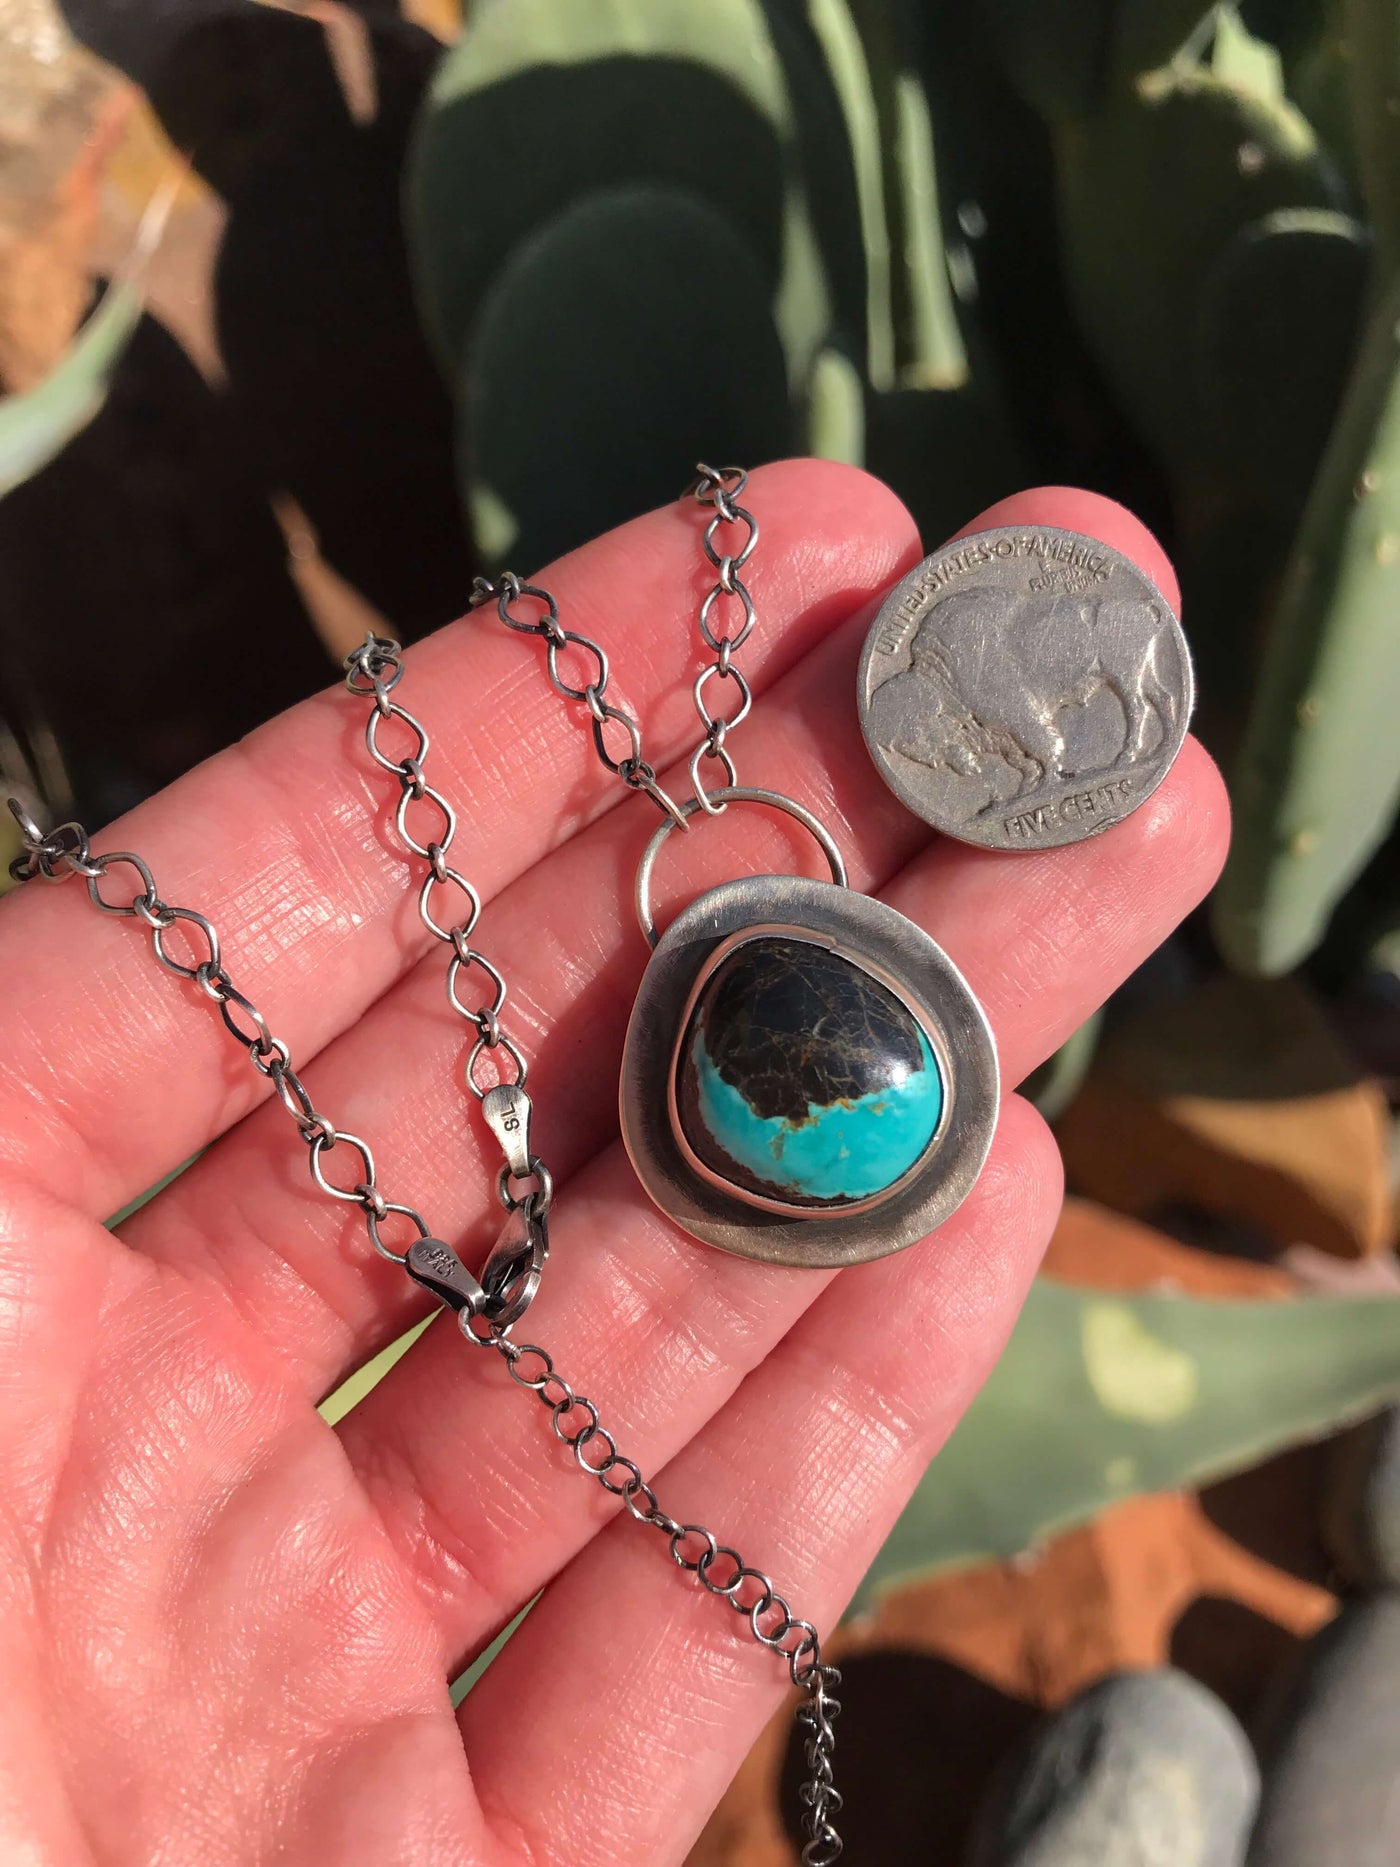 The Arapahoe Necklace, 2-Necklaces-Calli Co., Turquoise and Silver Jewelry, Native American Handmade, Zuni Tribe, Navajo Tribe, Brock Texas